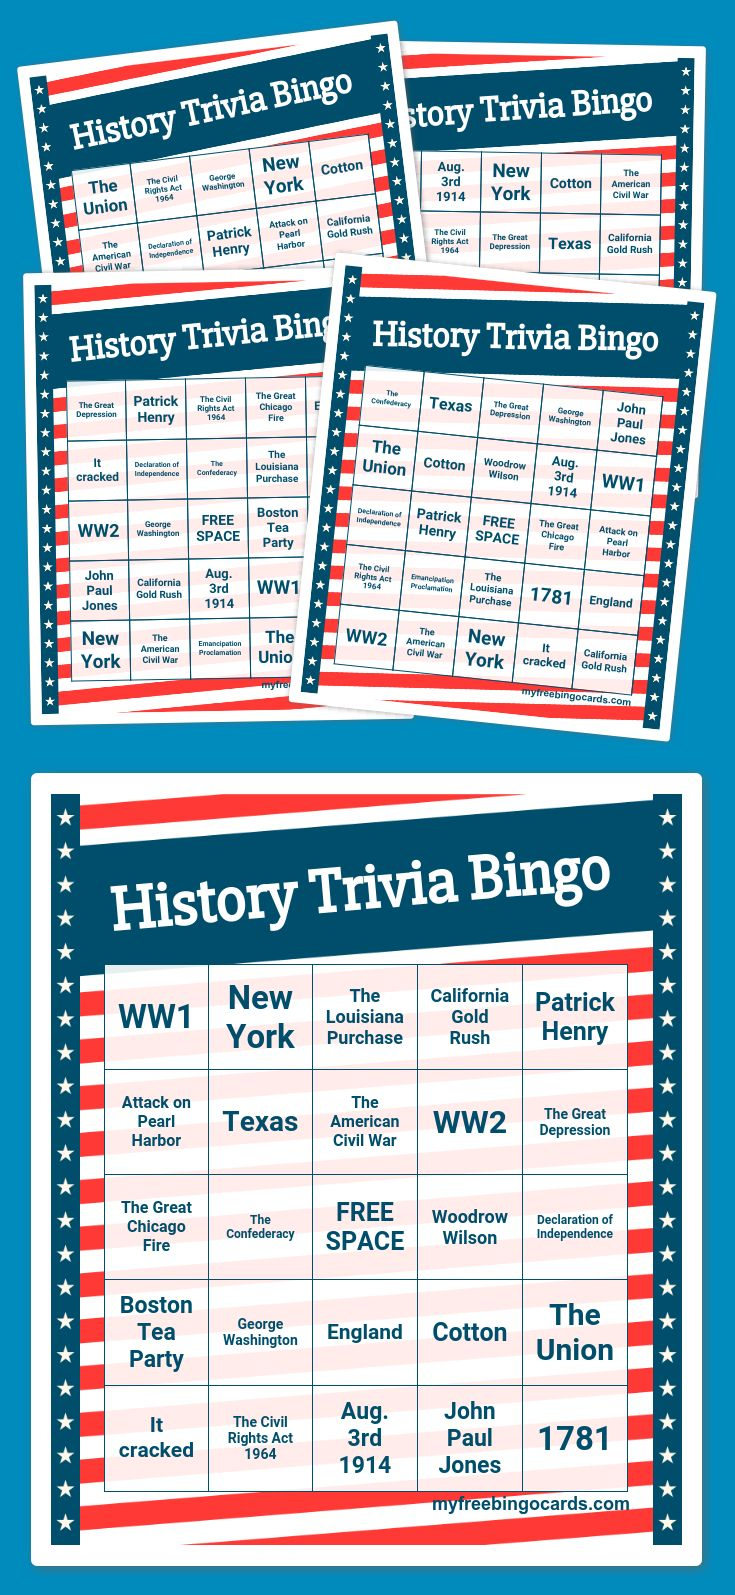 History Trivia Bingo How To Play Call Out The History Event Without 